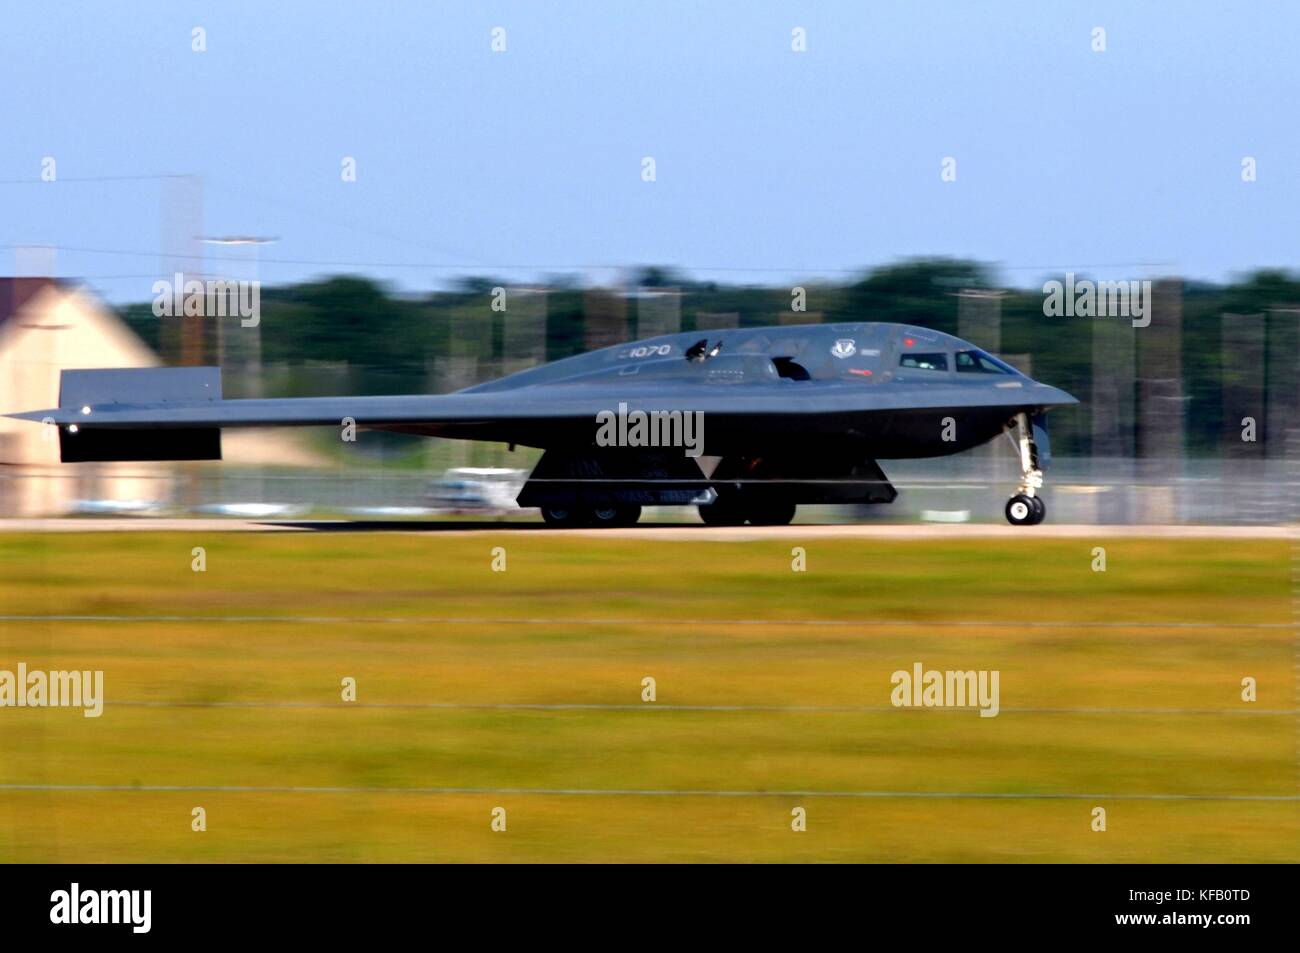 A U.S. Air Force B-2 Spirit stealth bomber aircraft takes off from the runway at the Whiteman Air Force Base August 24, 2009 near Knob Noster, Missouri.   (photo by Kenny Holston via Planetpix) Stock Photo